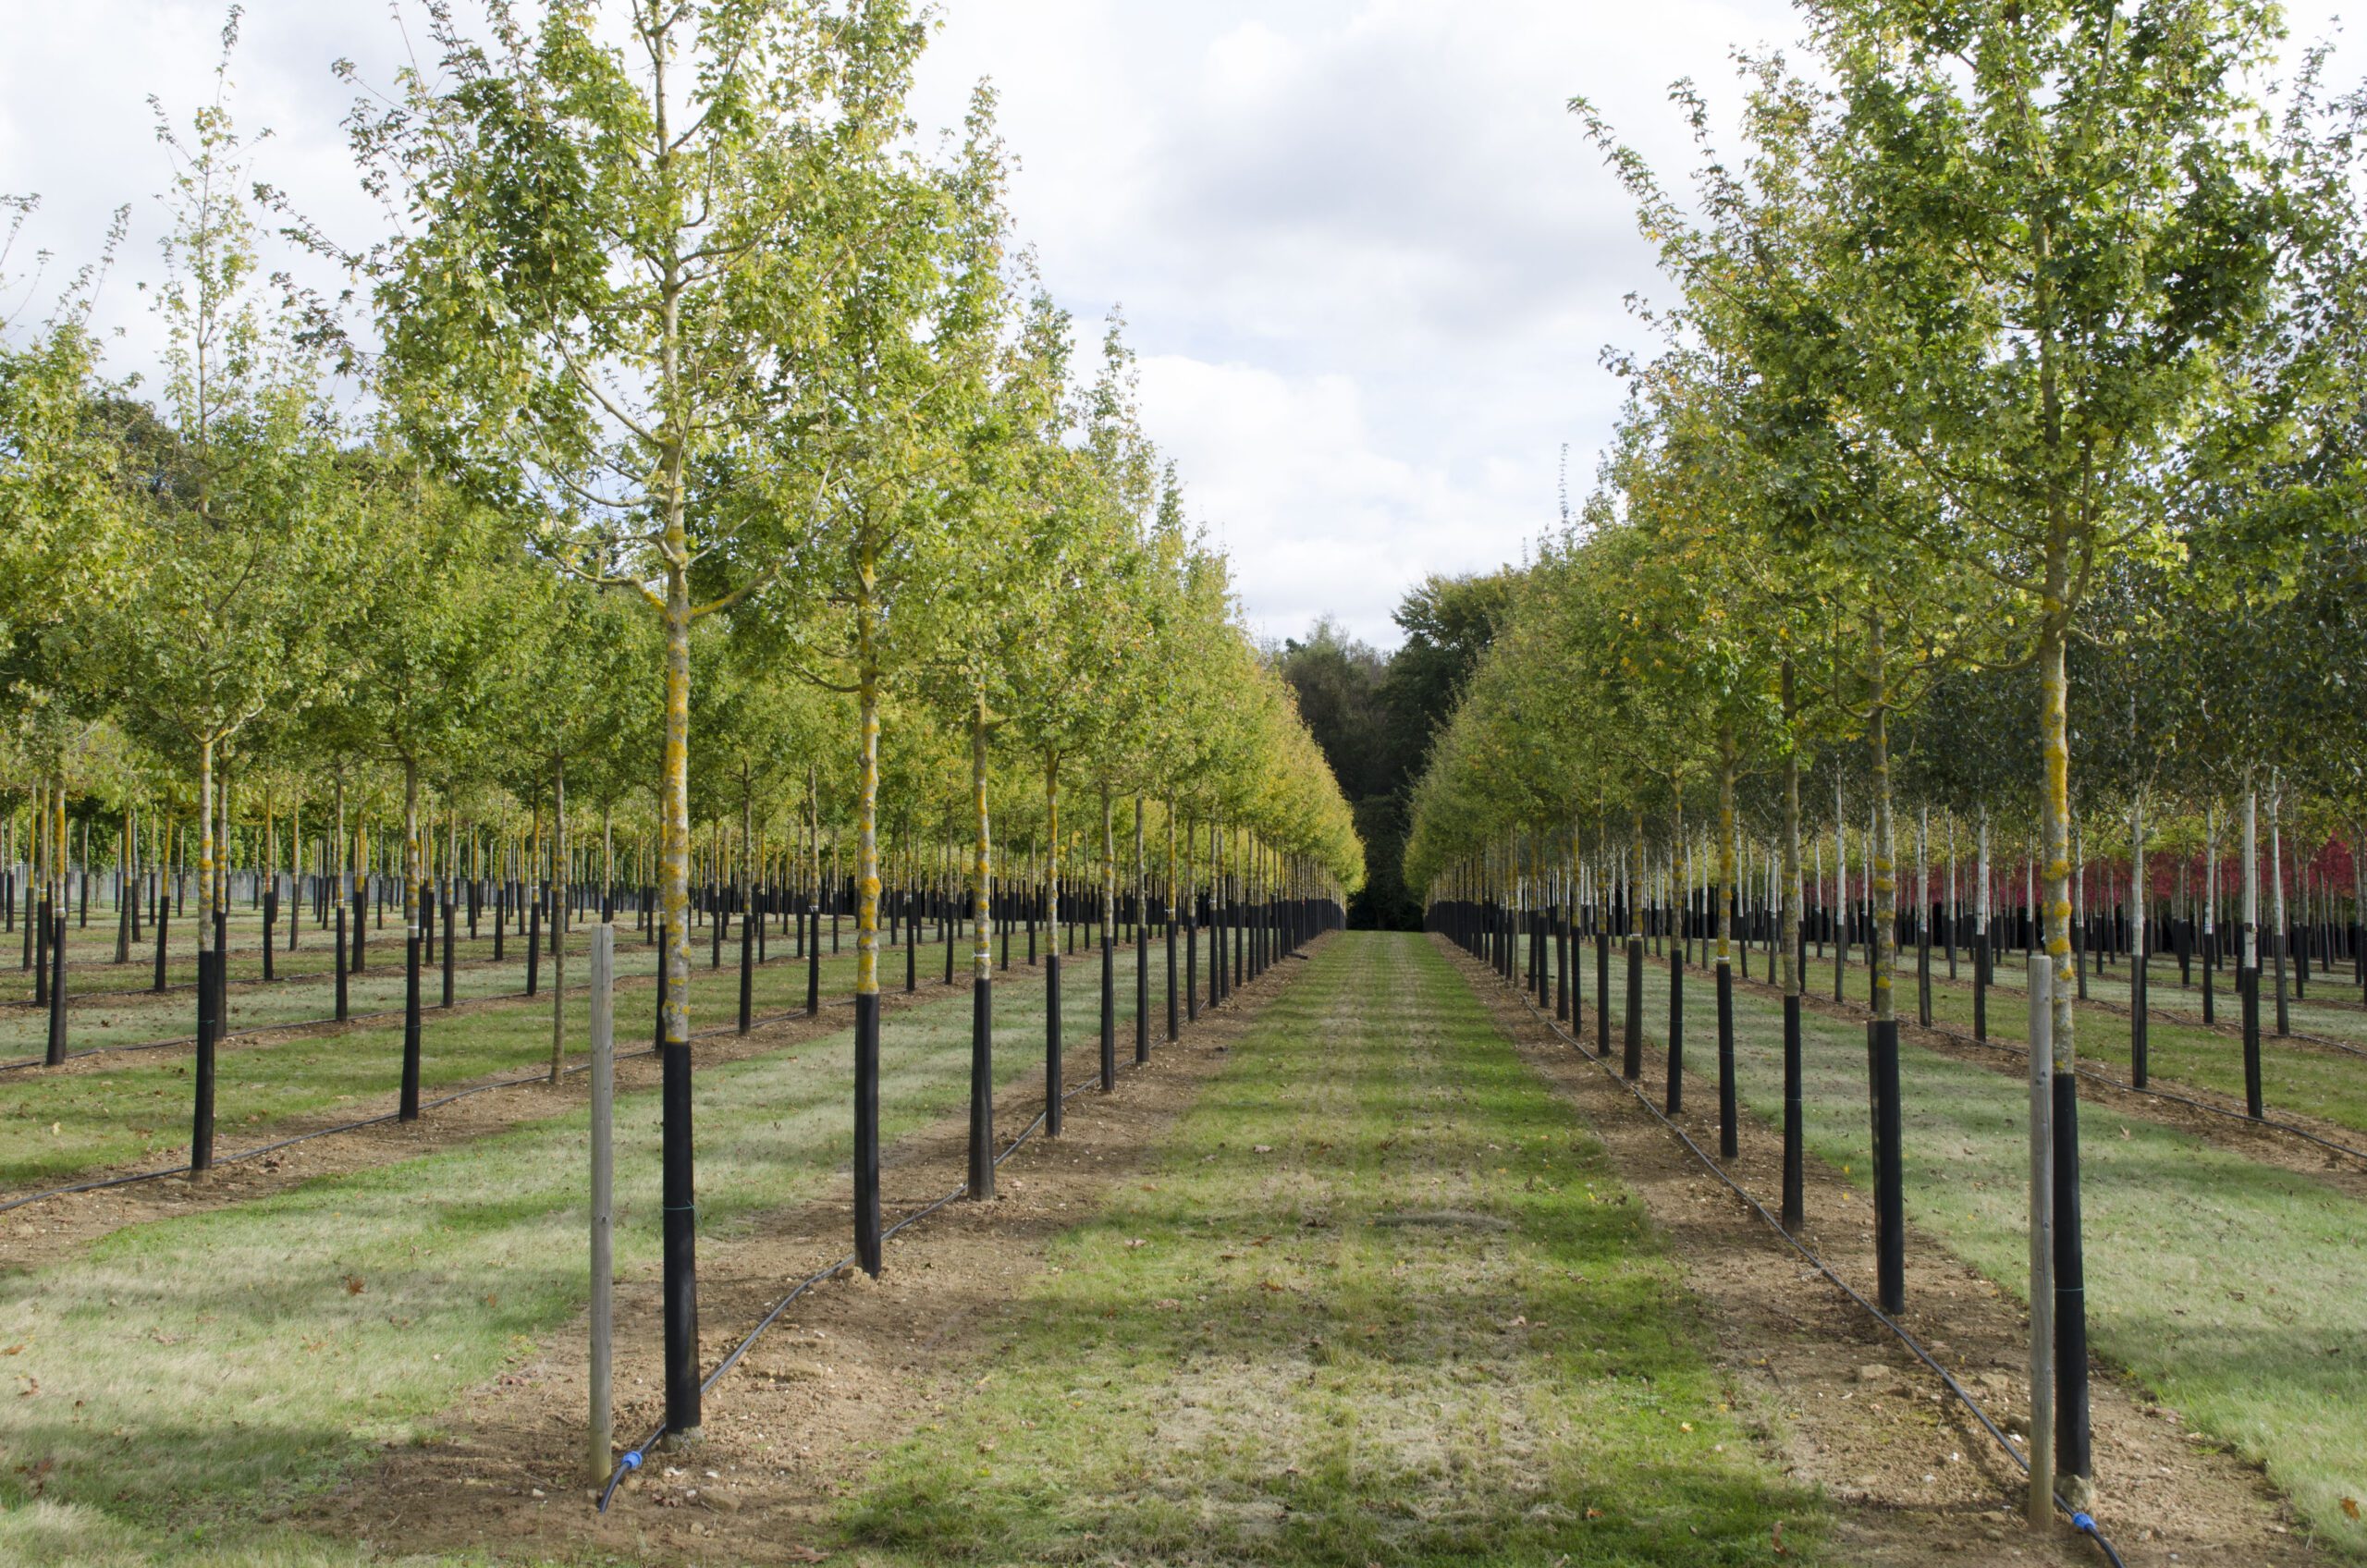 Acer campestre semi-mature trees growing in field